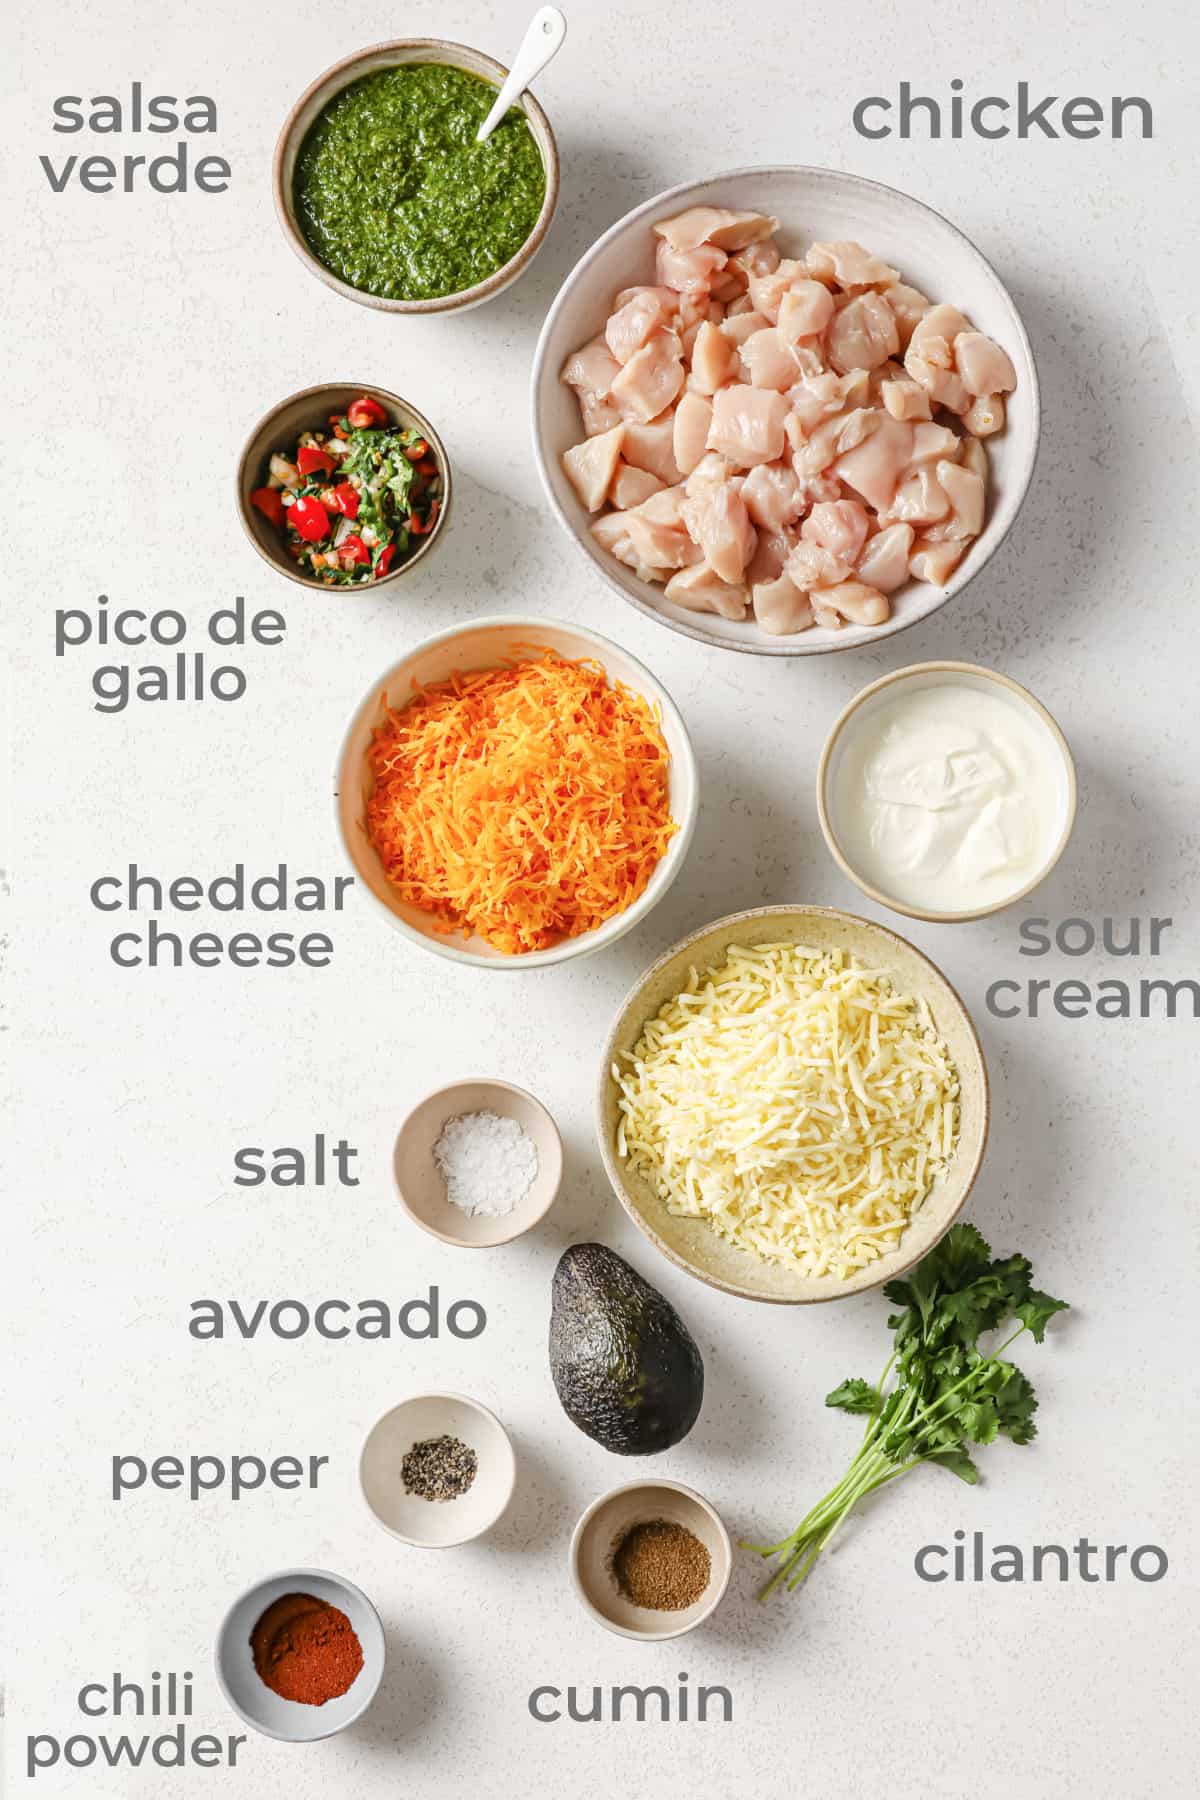 Ingredients all laid out to make a Mexican chicken casserole - chicken, cheese, salsa, pico de Gallo, avocado, cilantro and spices.